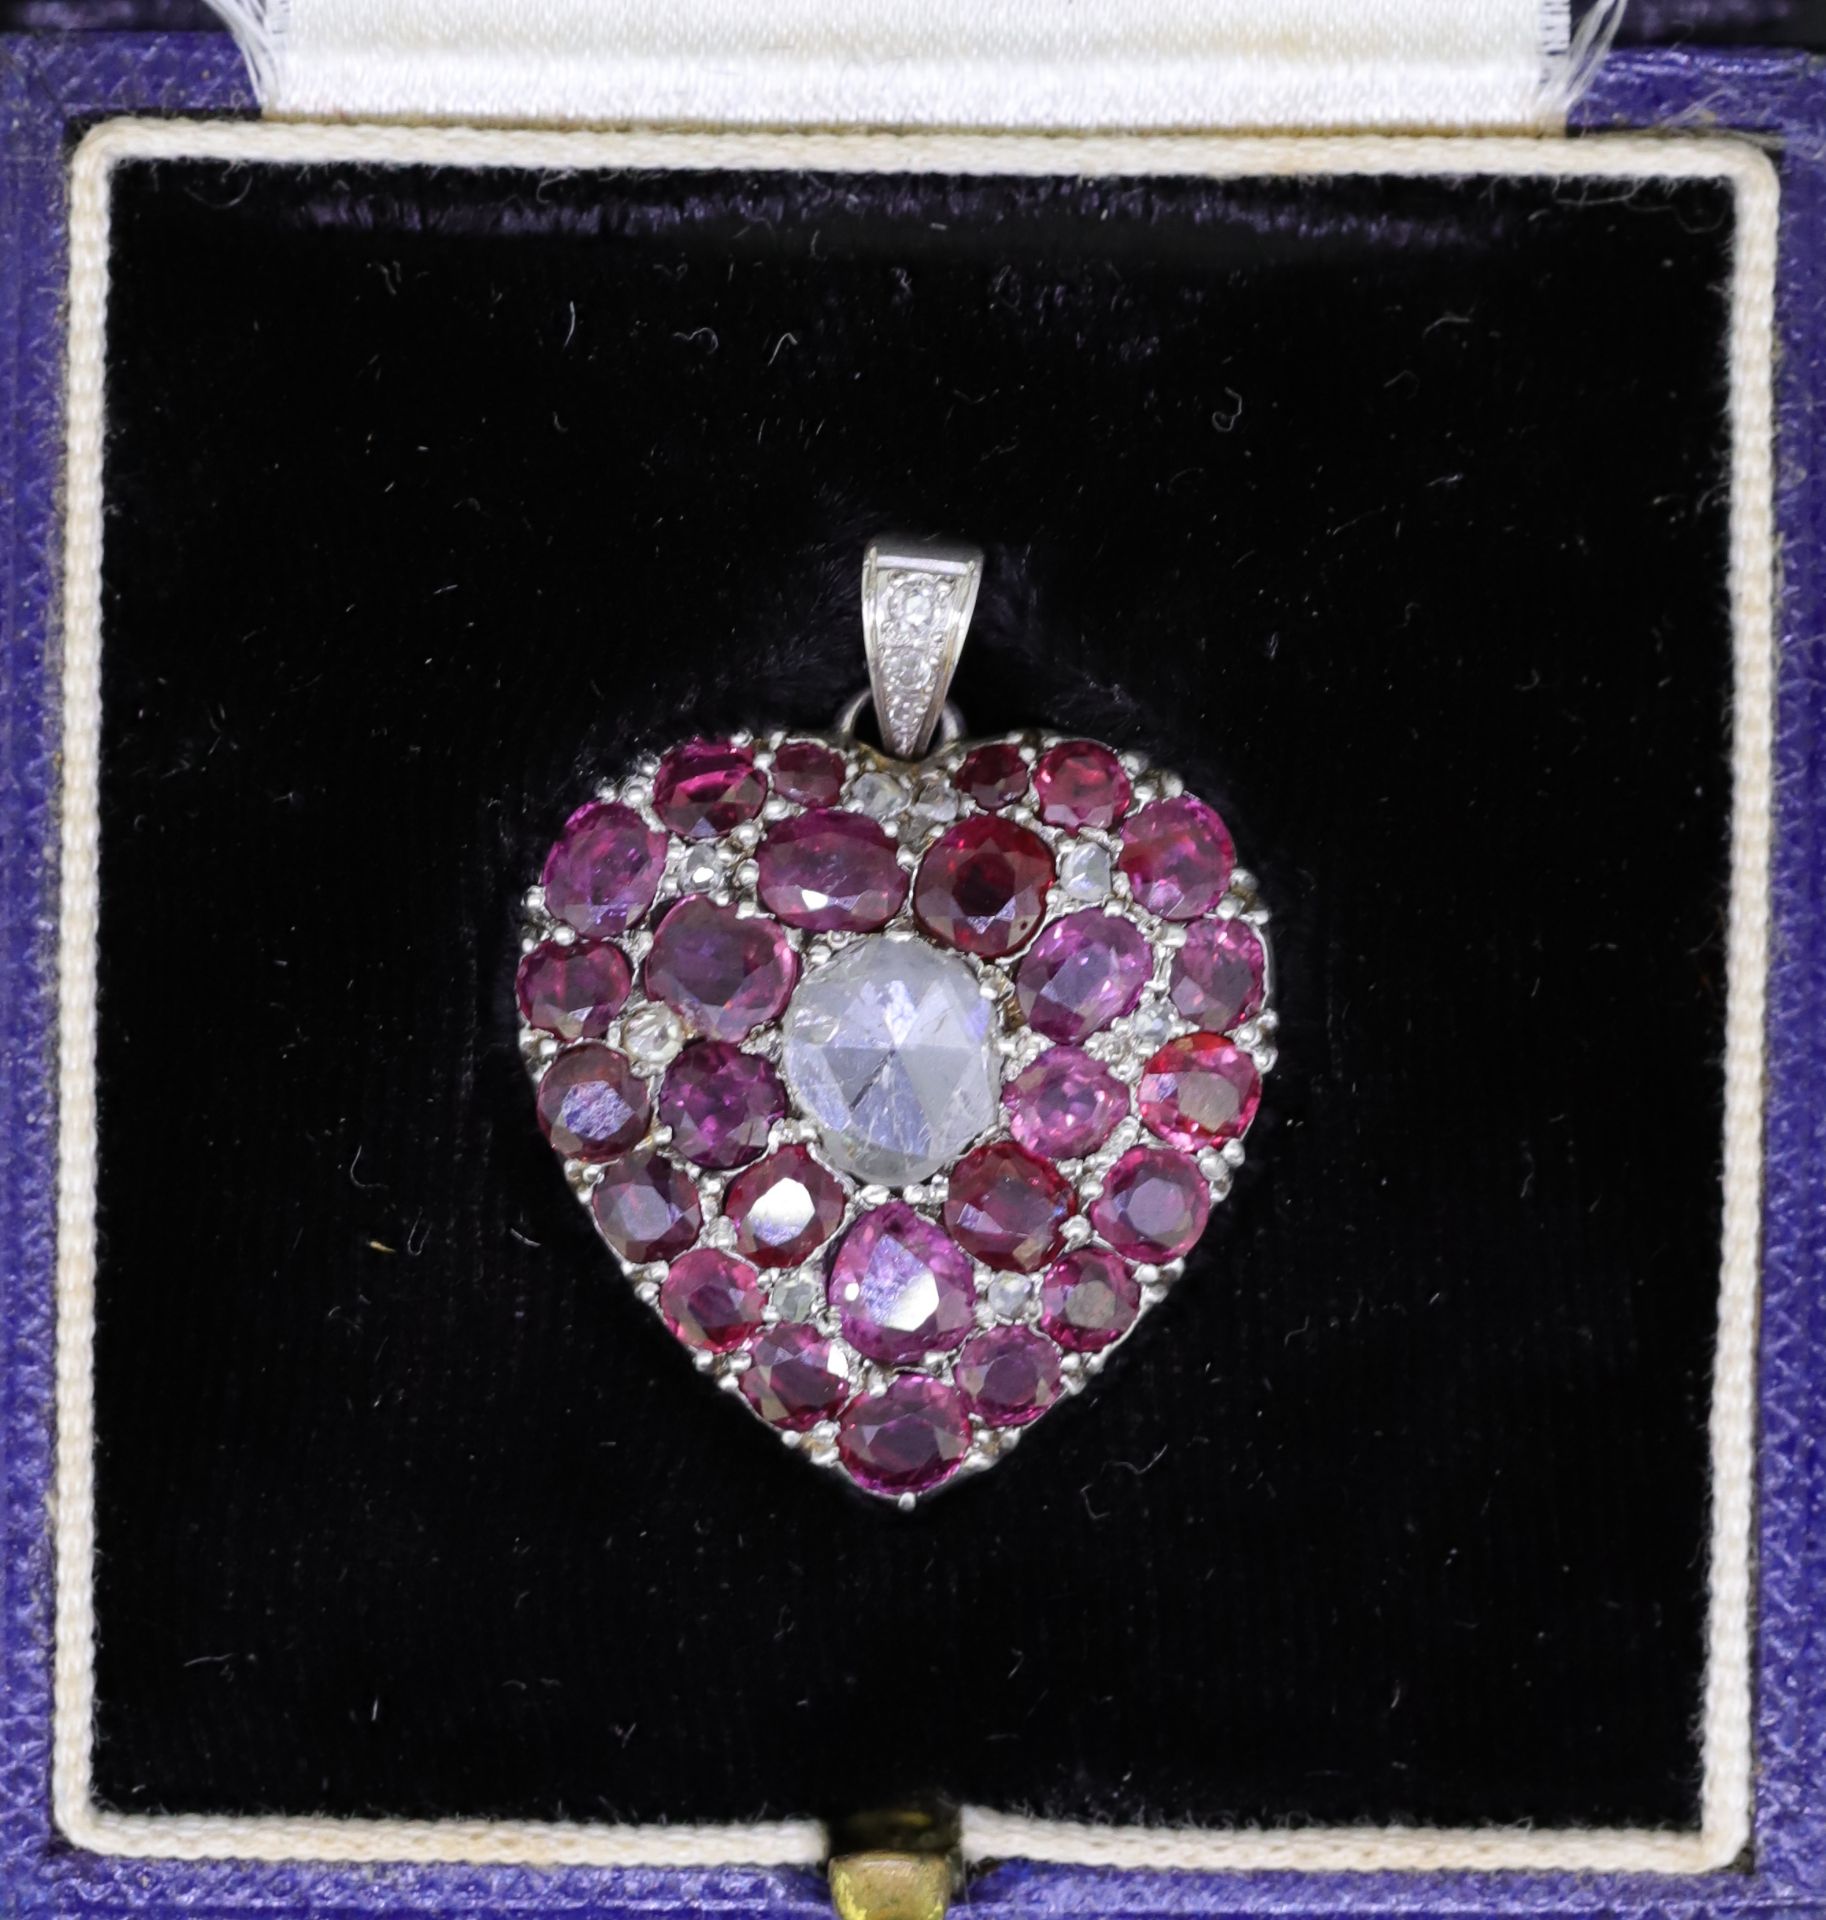 ANTIQUE DIAMOND AND RUBY HEART PENDANT - Image 3 of 3